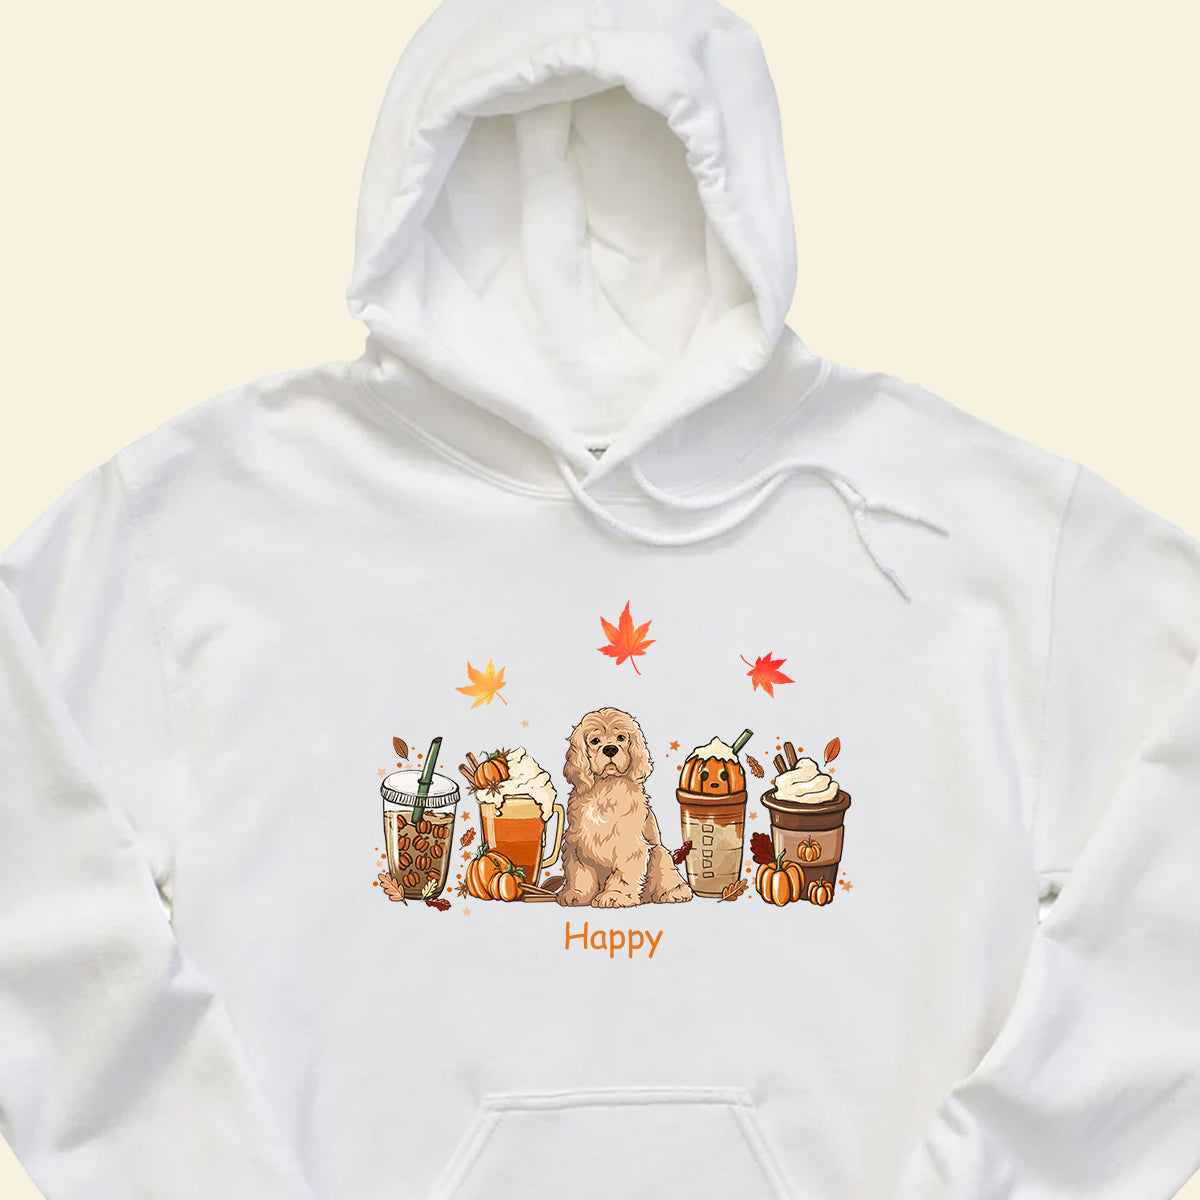 Pumpkin Spice Latte Iced Autumn - Personalized Shirt - Gift For Dog Lovers, Halloween